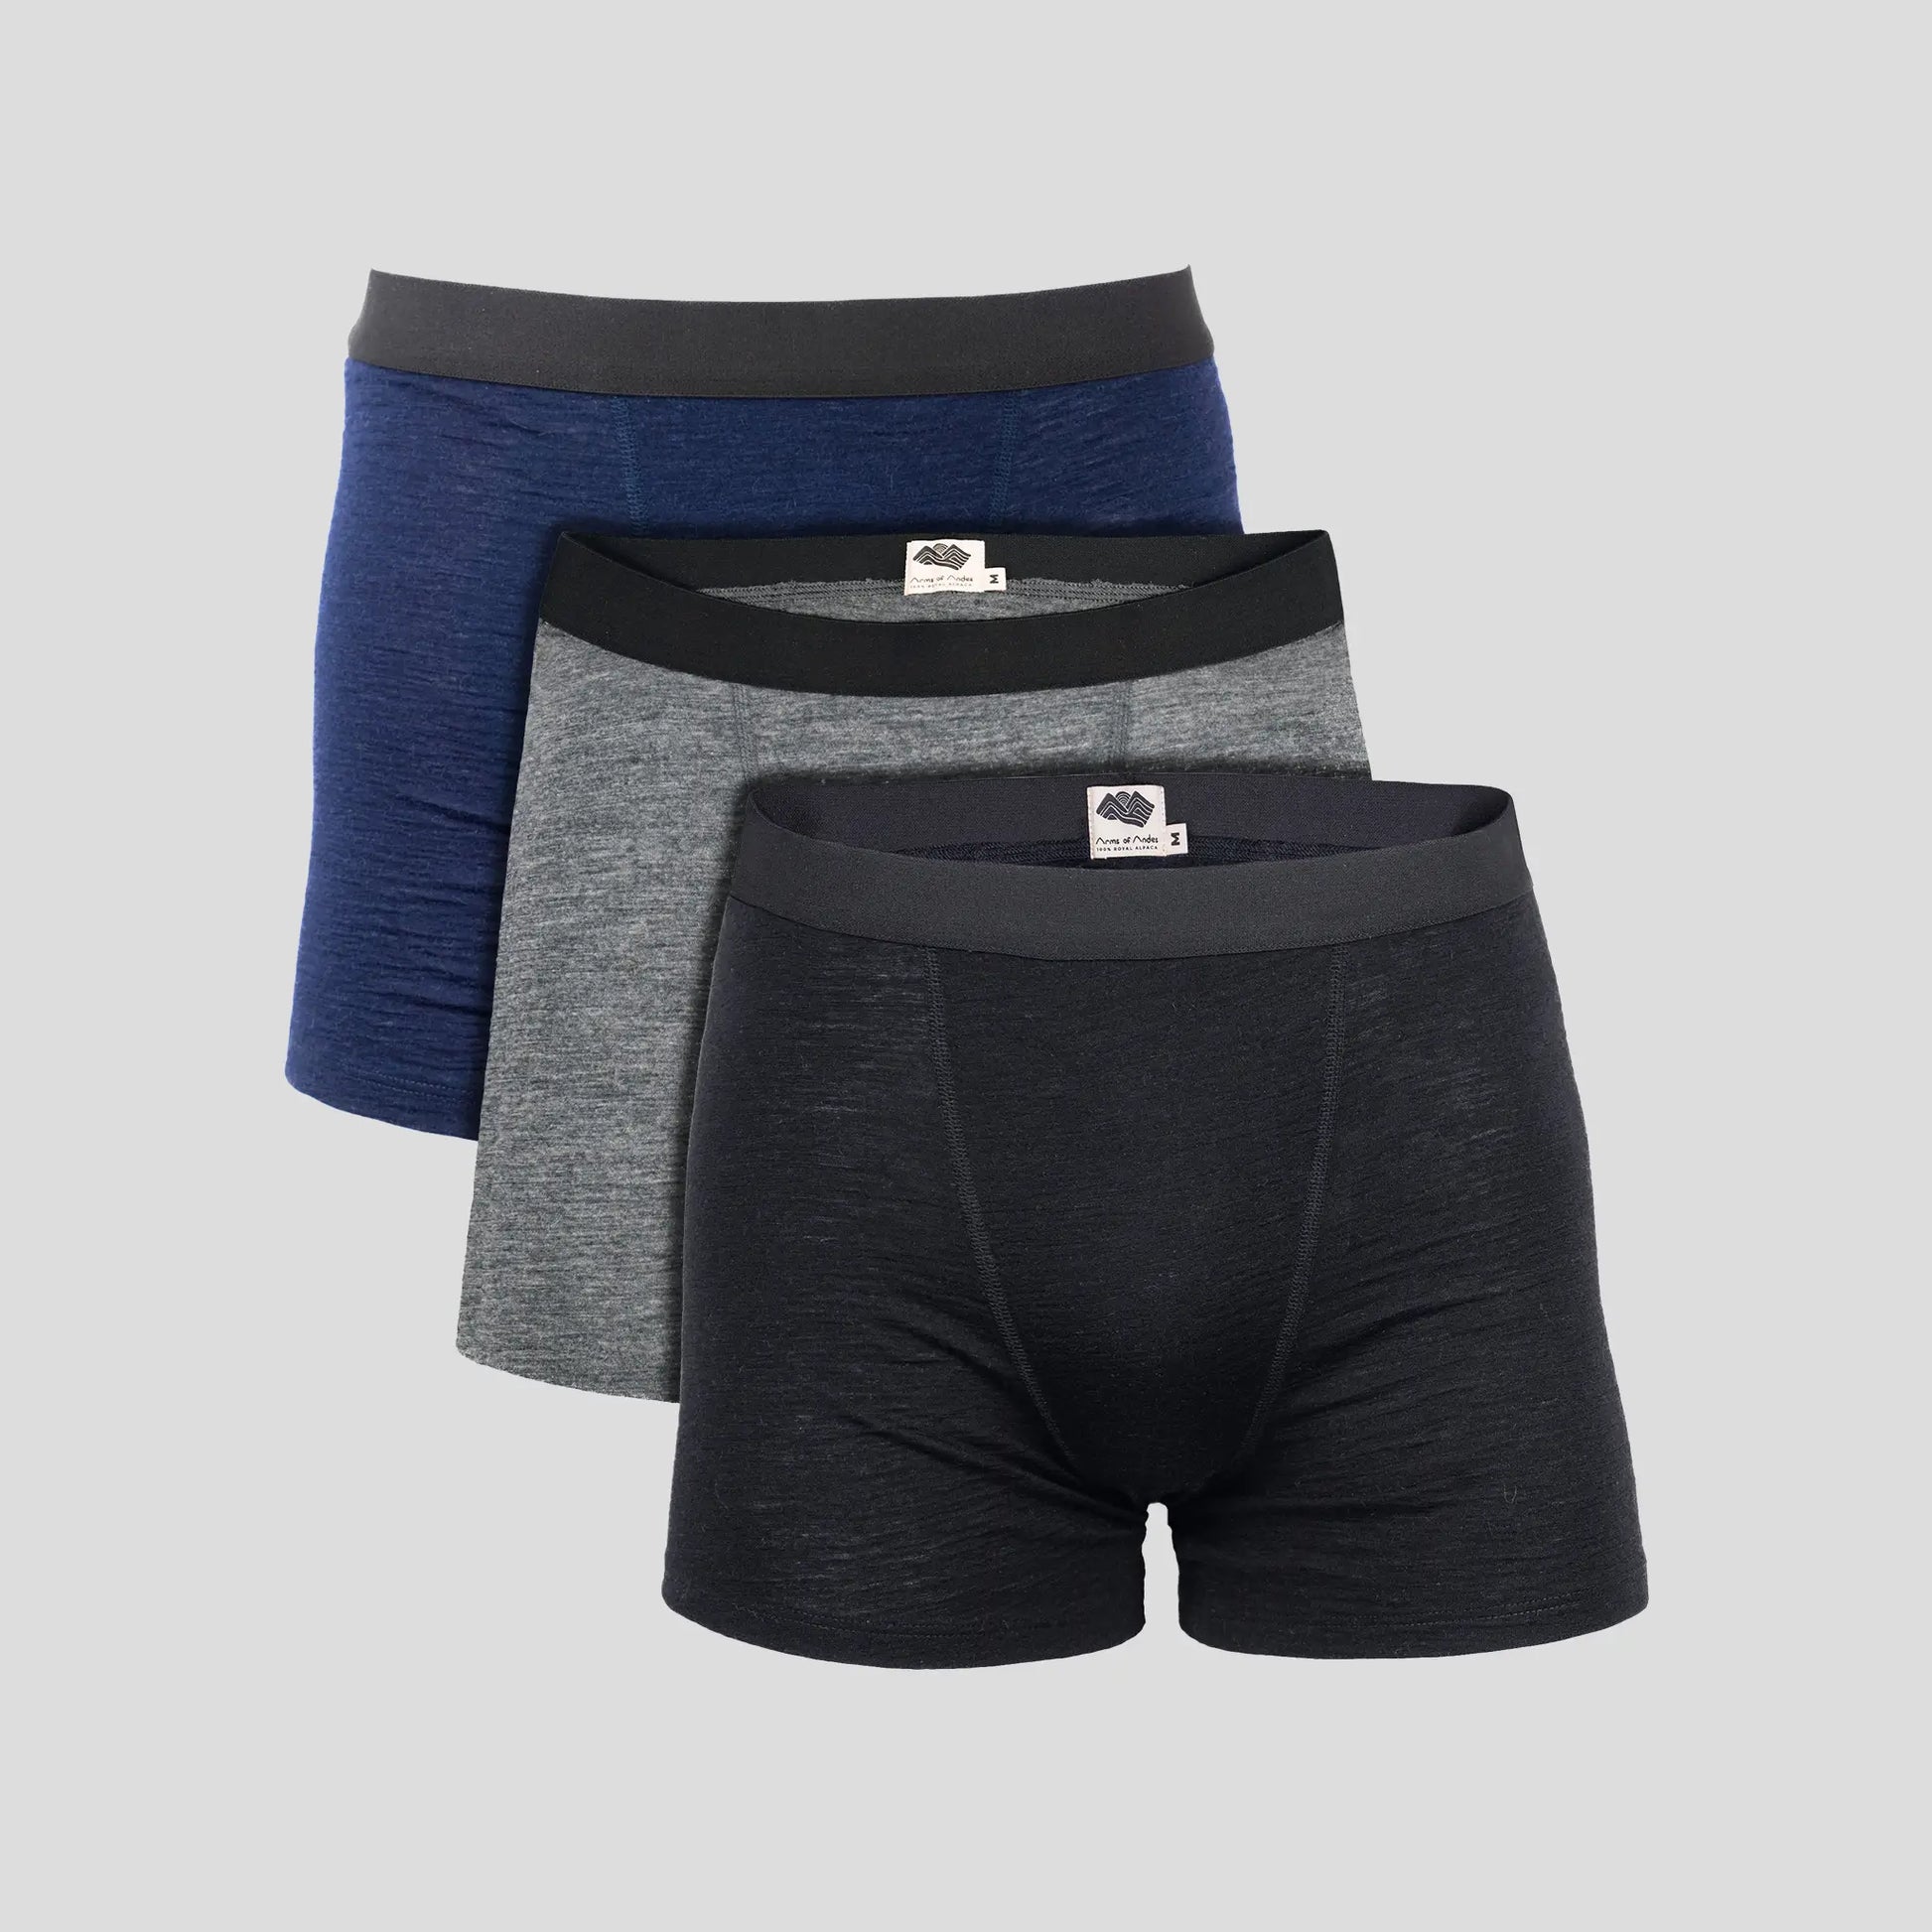 What's the deal with merino wool underwear? - New Zealand Natural